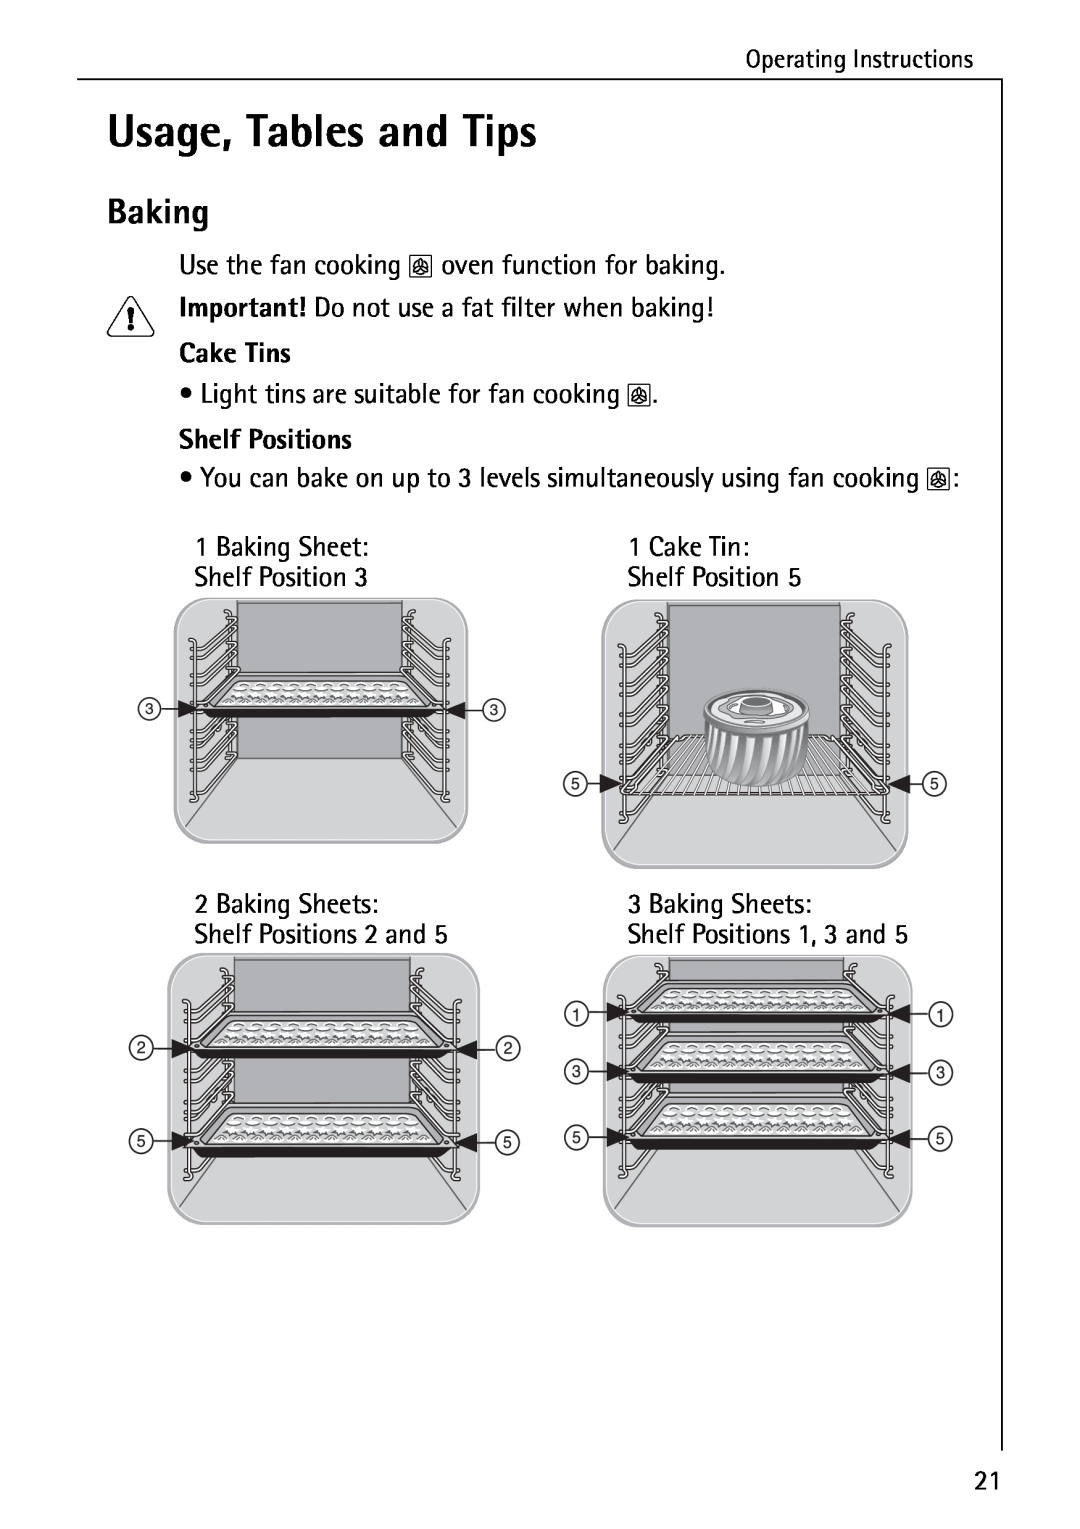 AEG B 2100 operating instructions Usage, Tables and Tips, Baking, Cake Tins, Shelf Positions 